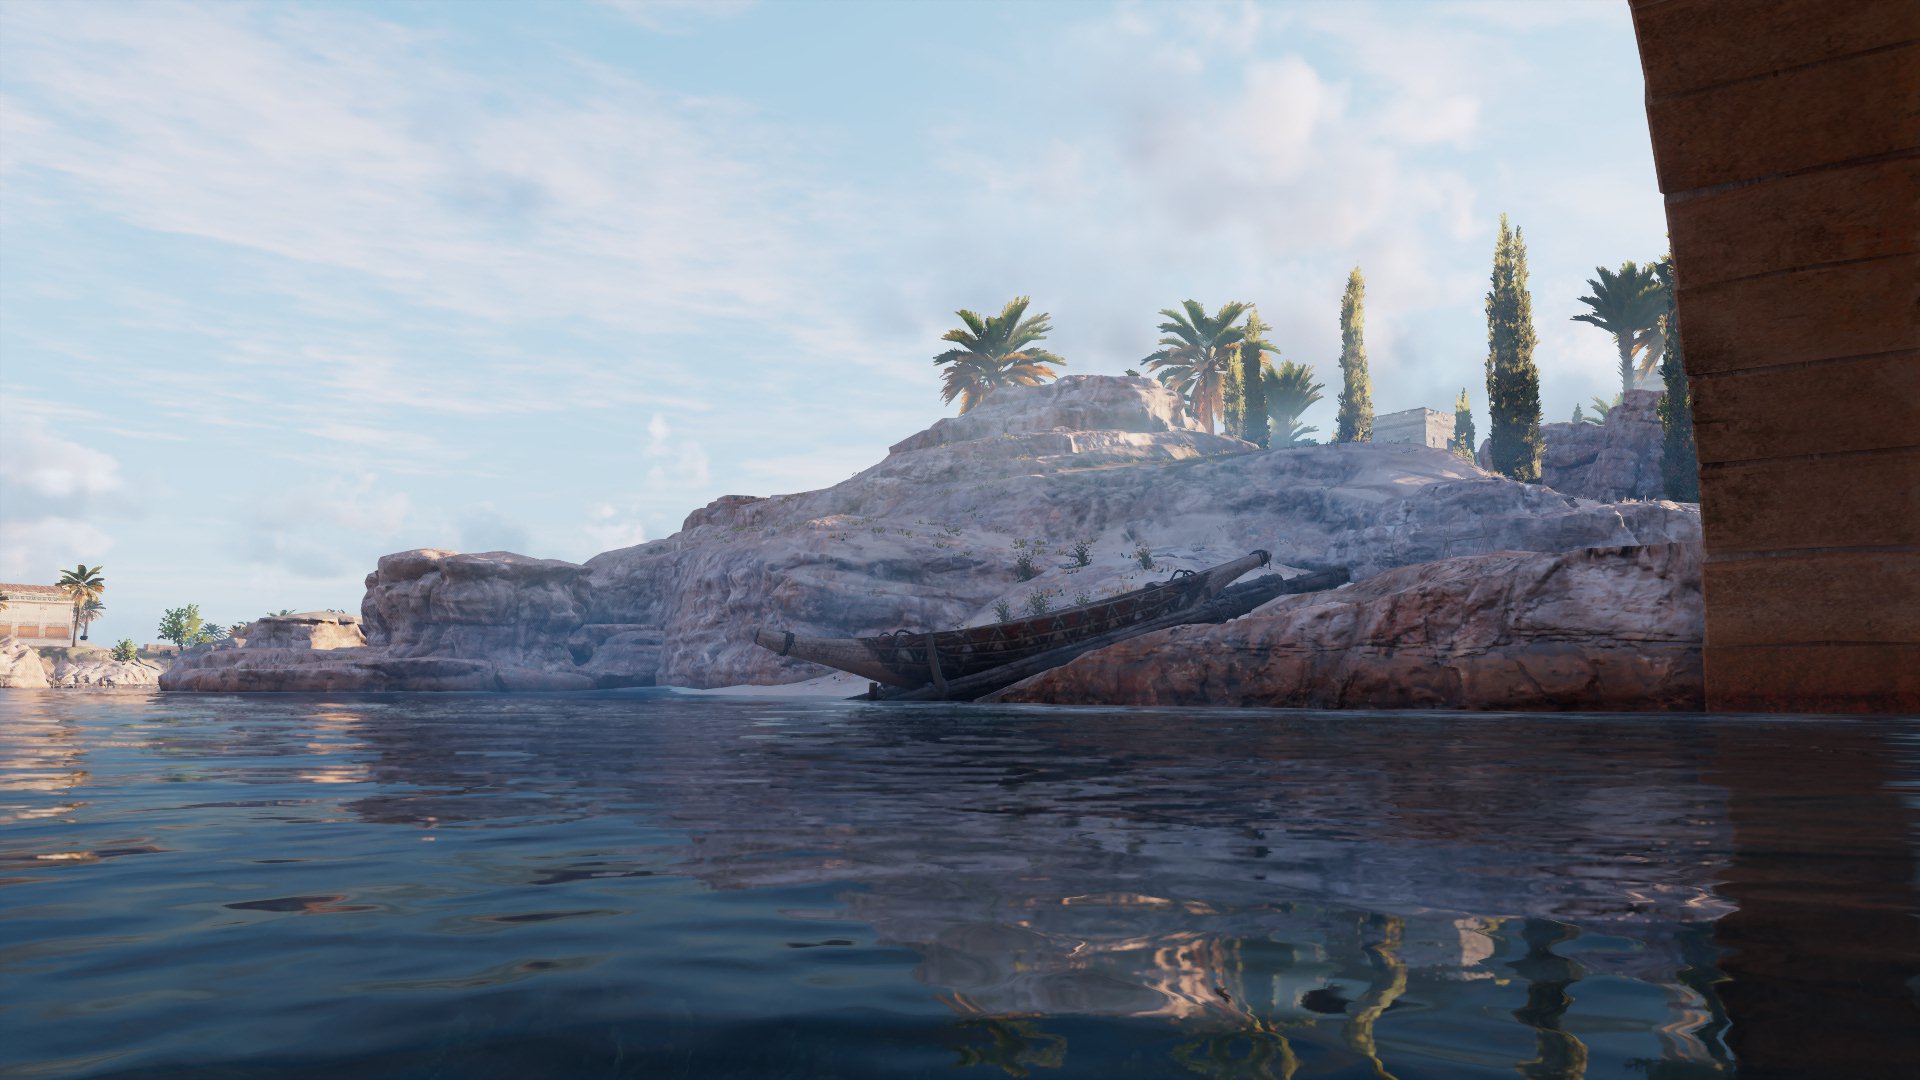 Boat Egypt Assassins Creed Origins Assassins Creed Ancient Old Summer Water Africa Rocks 1920x1080